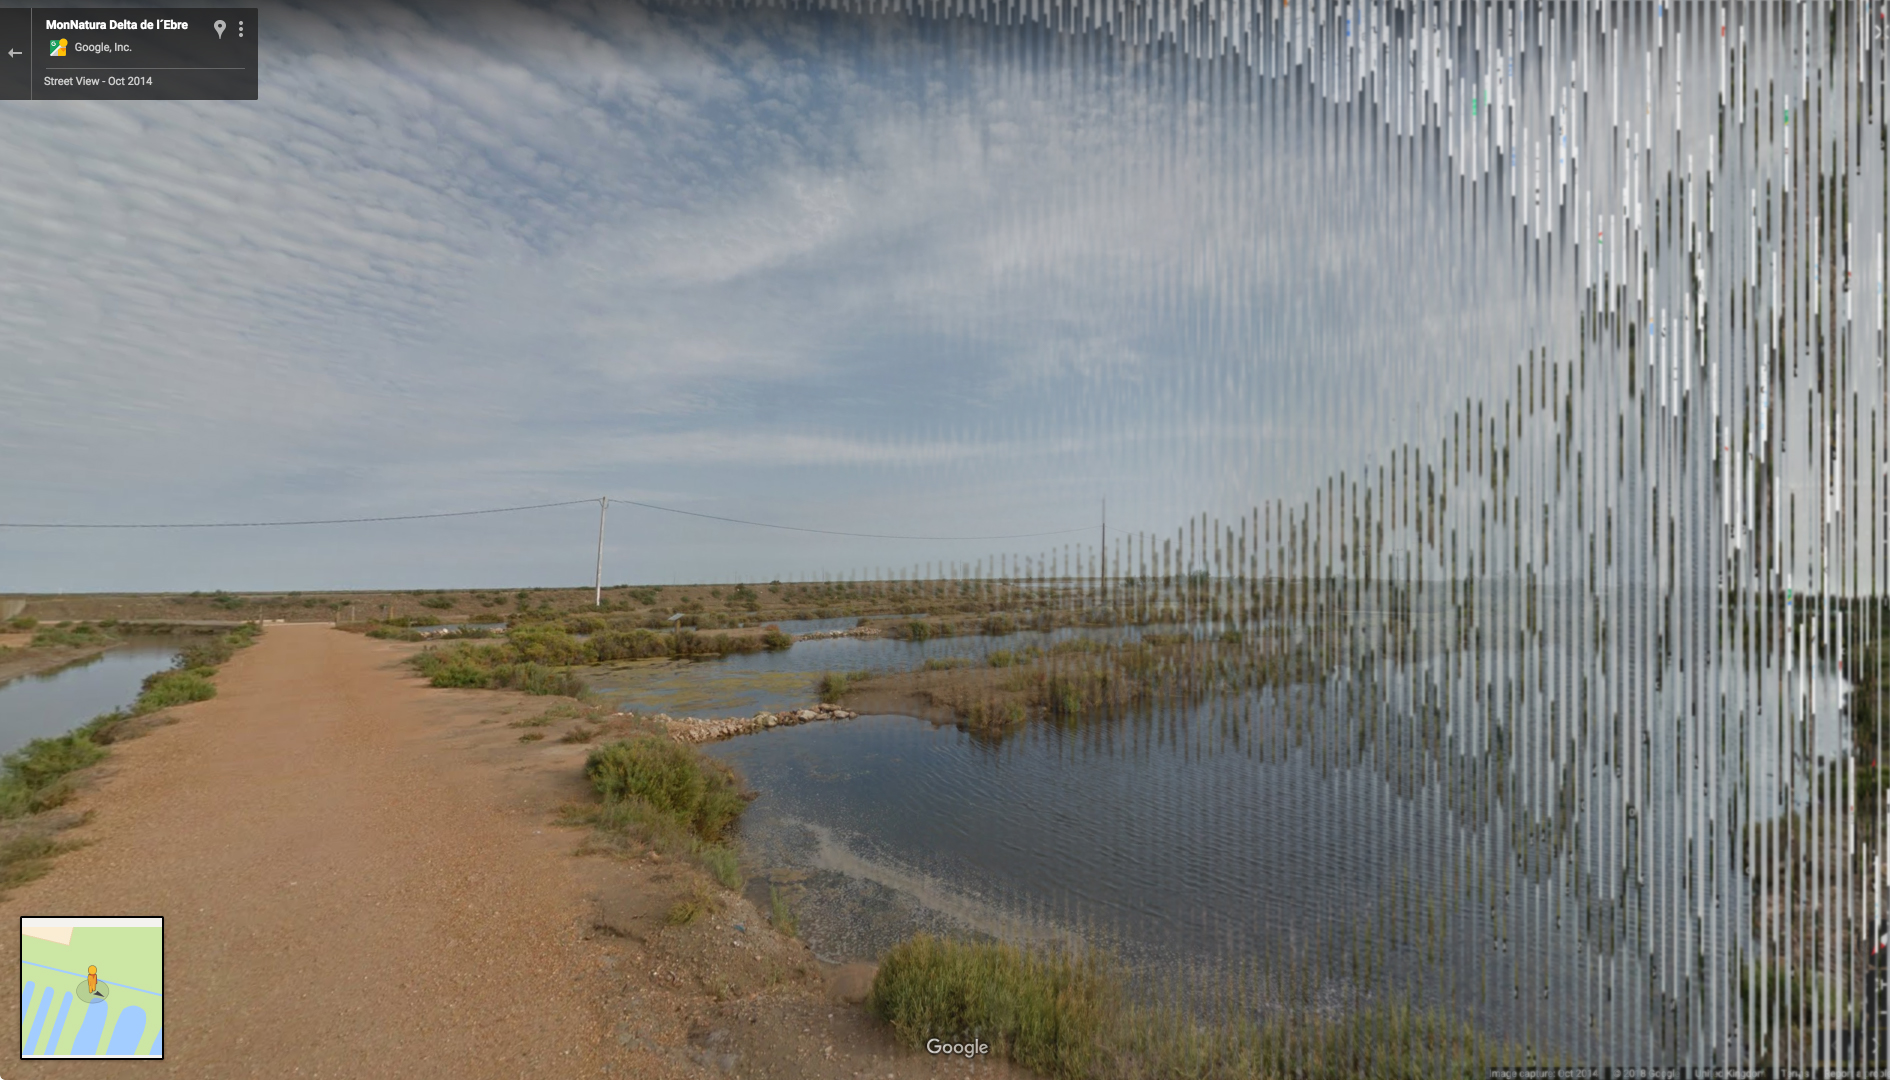 A distorted screen shot of a Google Street View showing a road in the Ebro delta